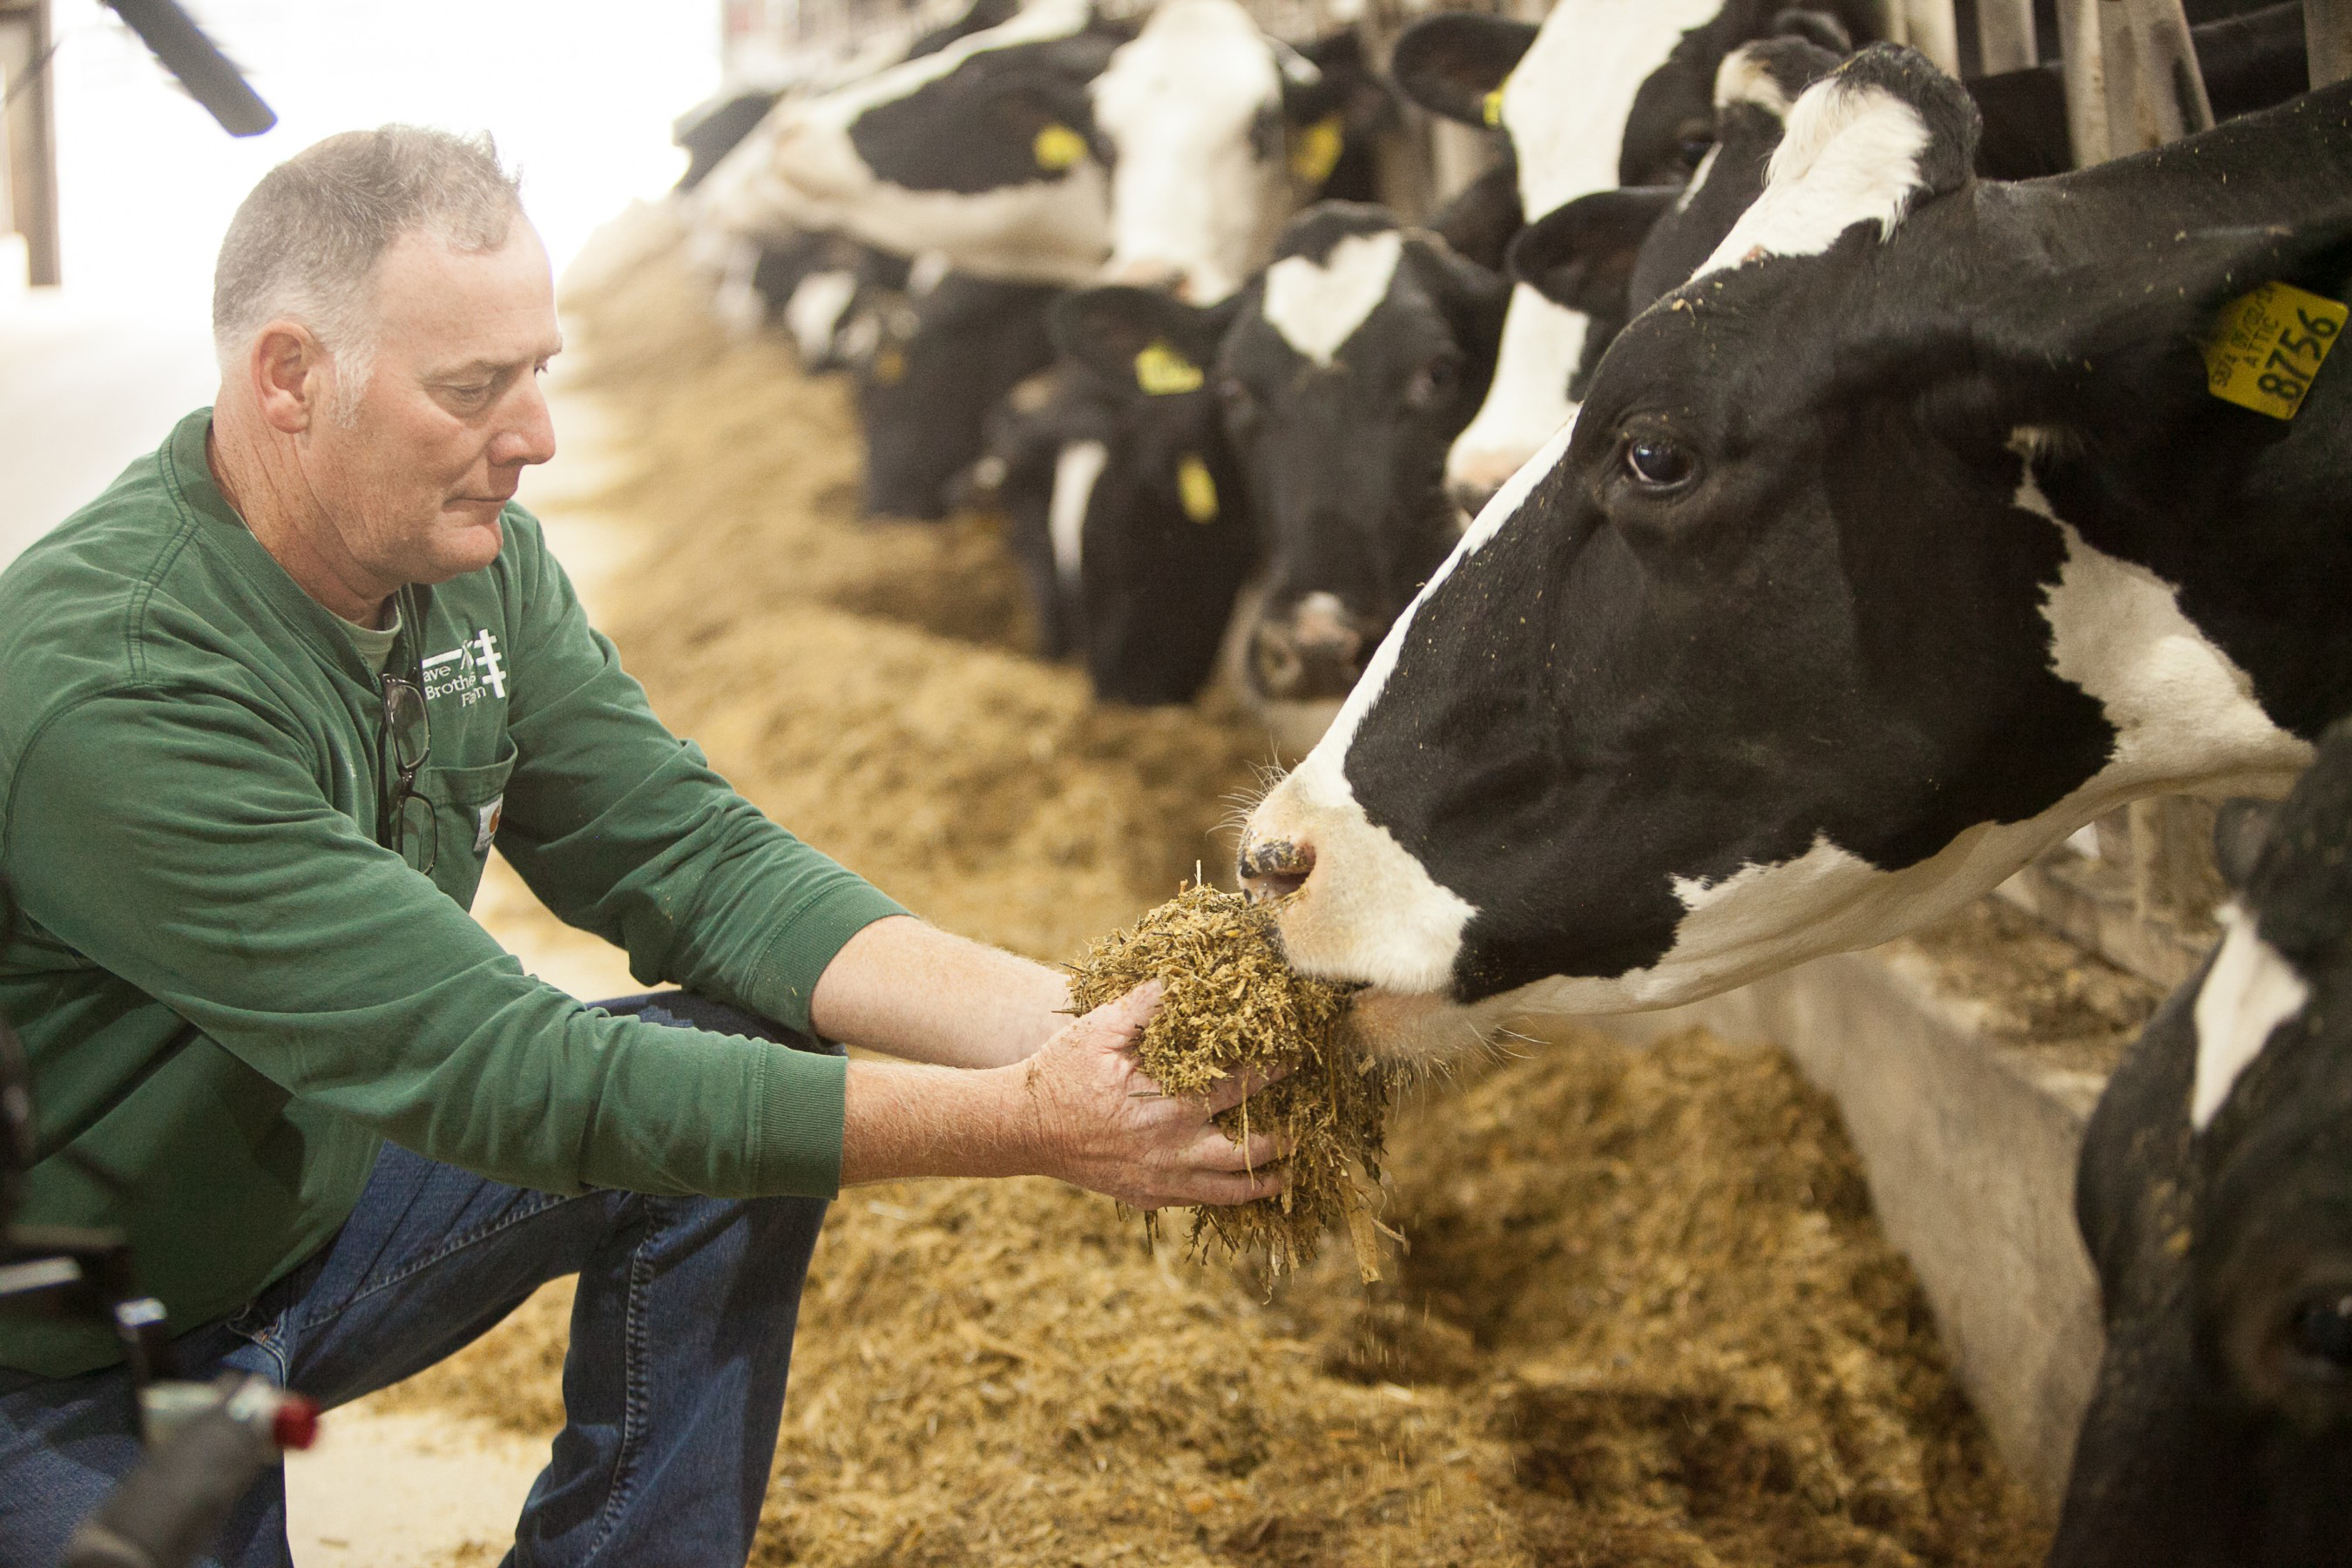 U.S. Dairy Industry Advances Three Game-Changing Solutions to Deliver a More Sustainable and Secure Food System